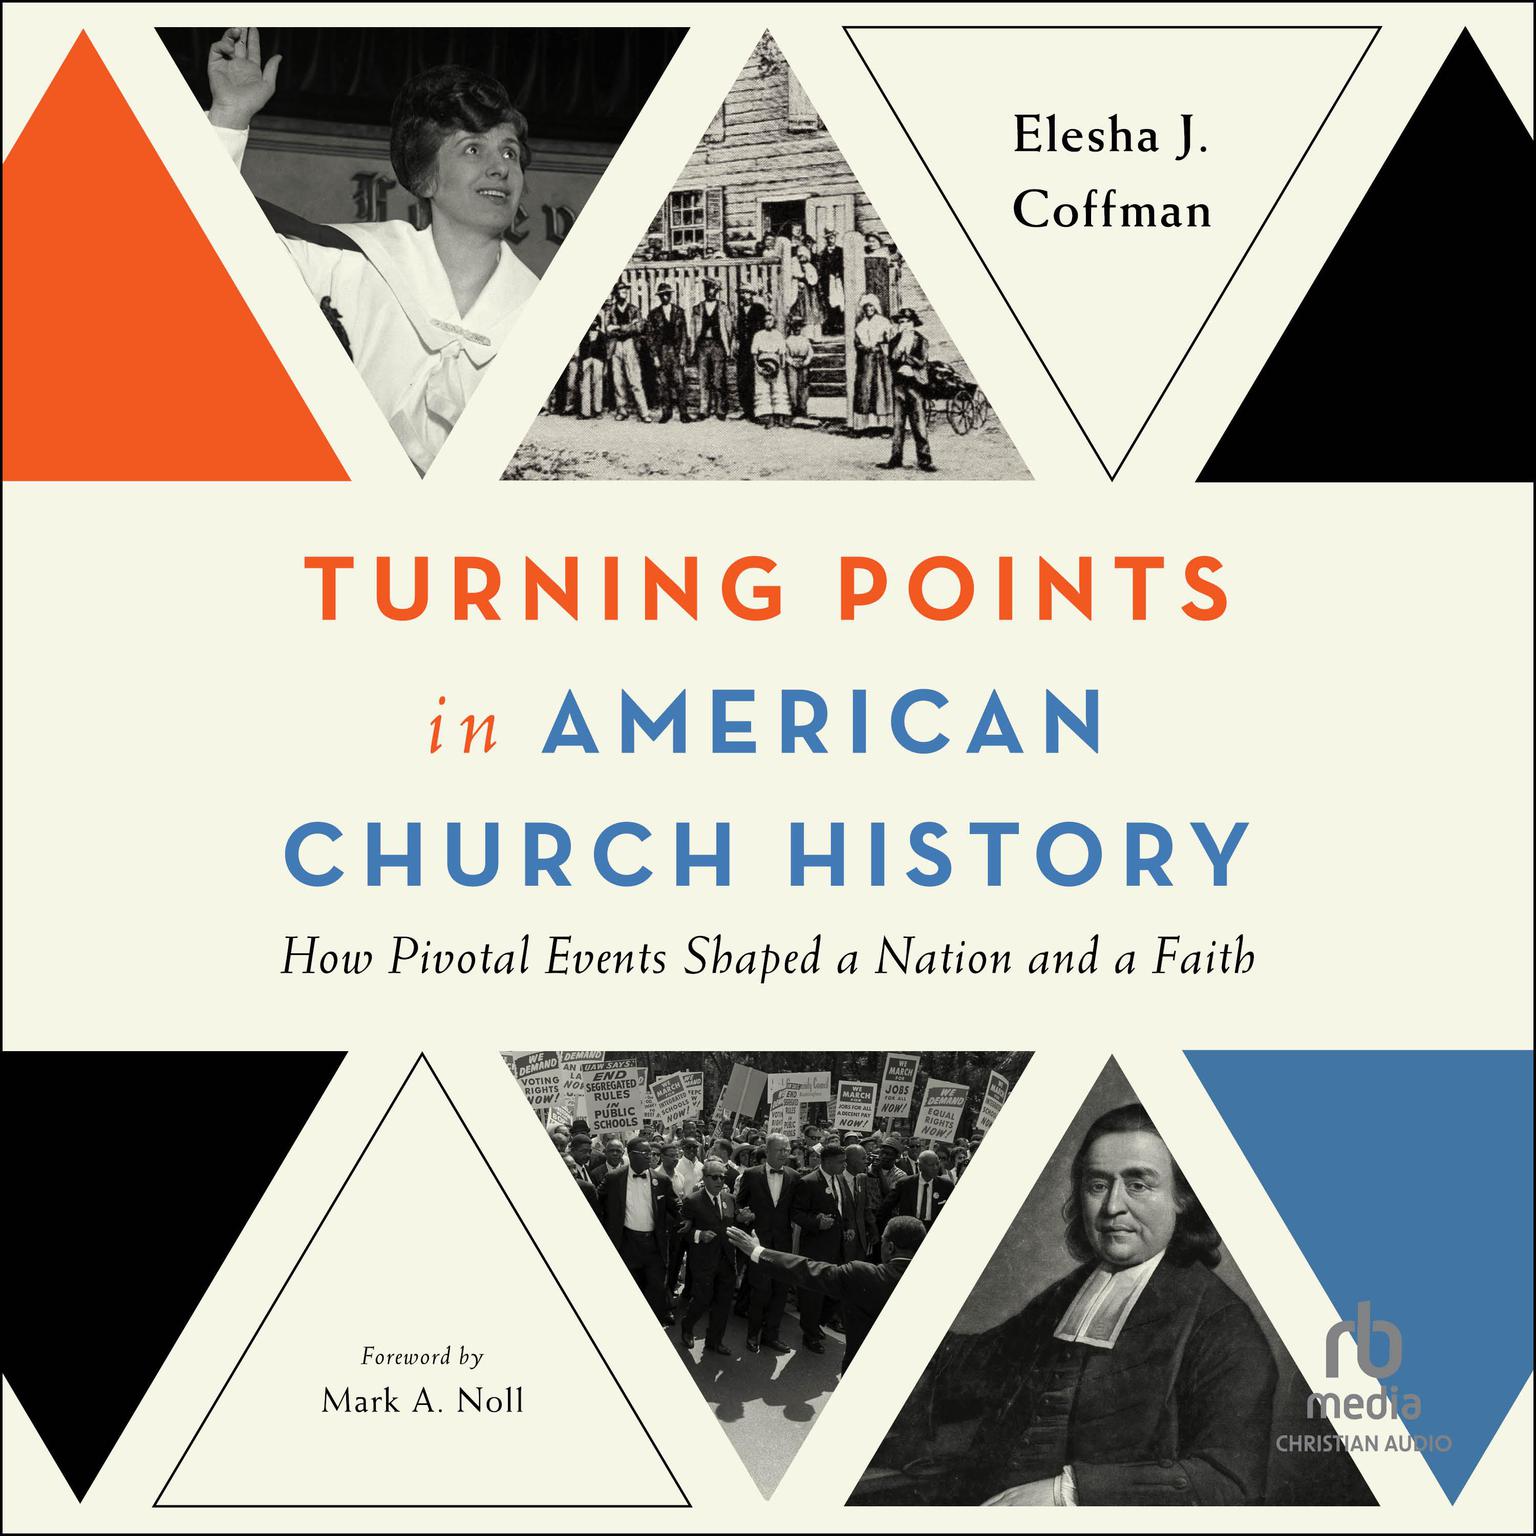 Turning Points in American Church History: How Pivotal Events Shaped a Nation and a Faith Audiobook, by Elesha J. Coffman